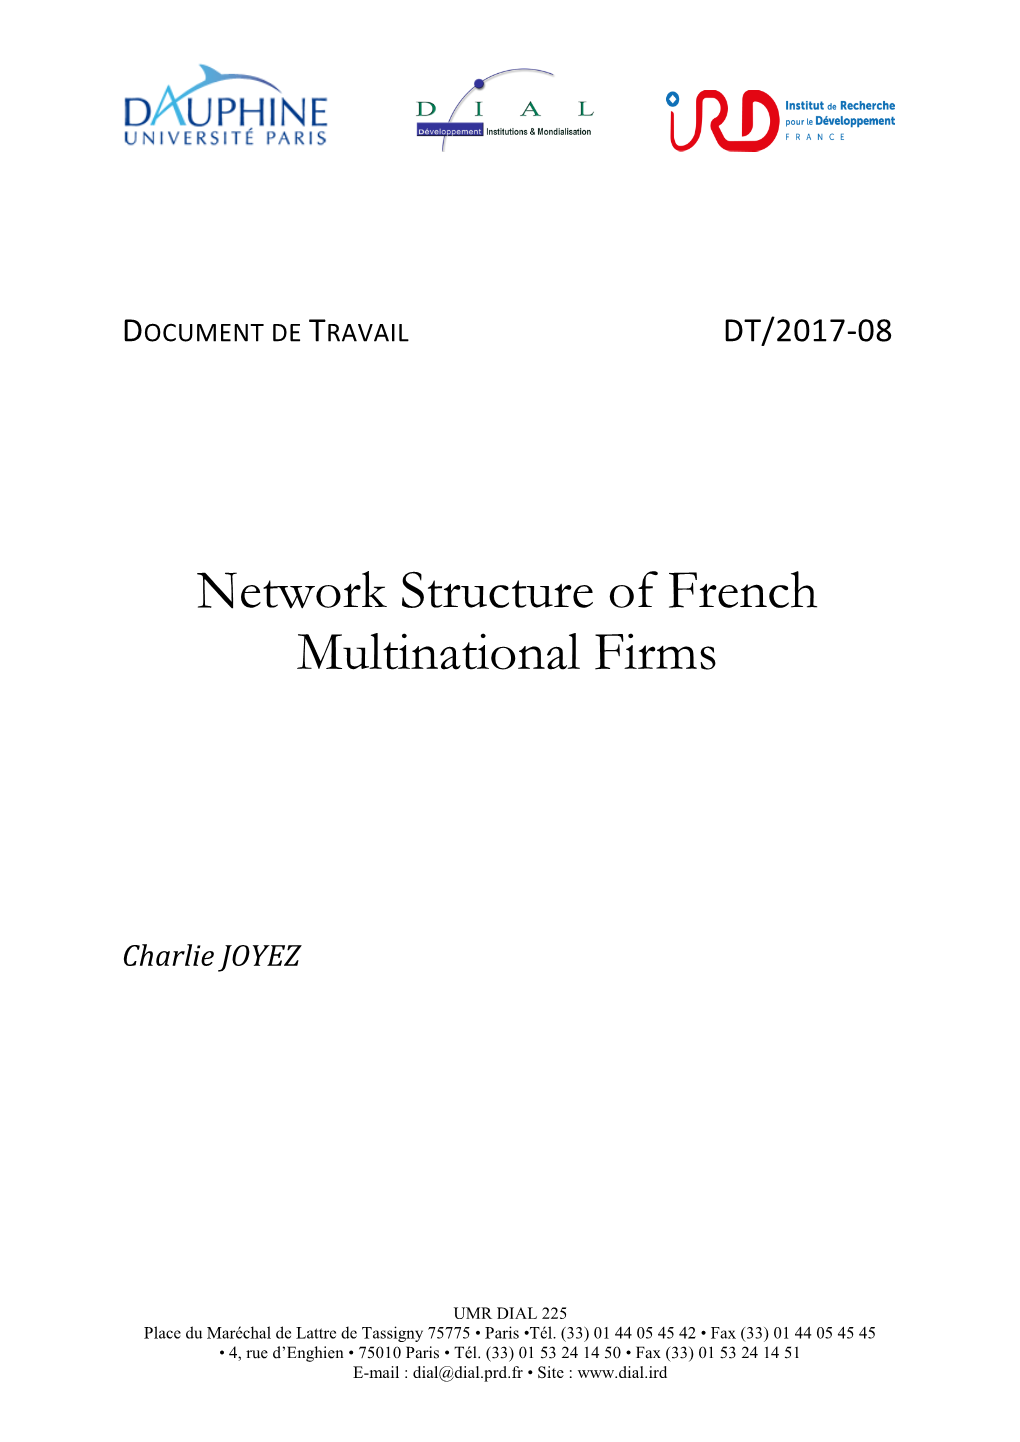 Network Structure of French Multinational Firms